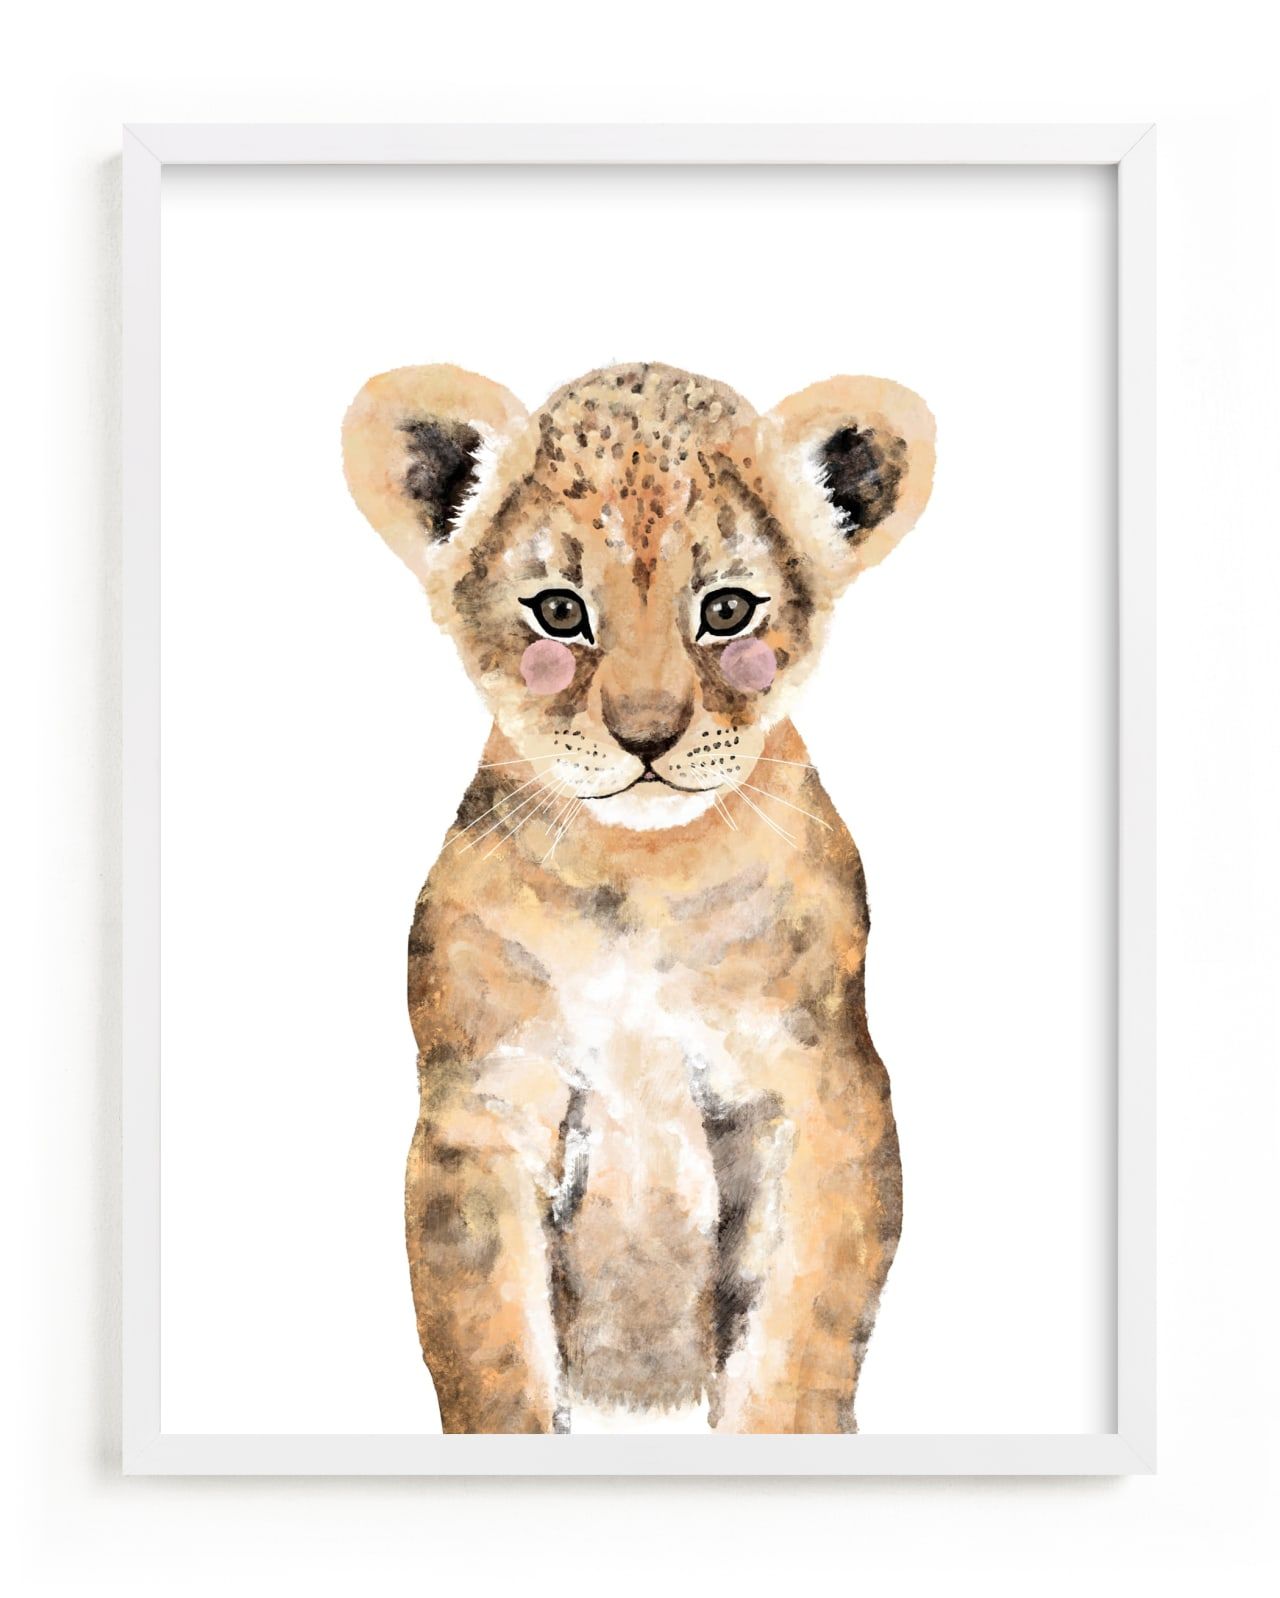 "Baby Animal Lion" - Art Print by Cass Loh. | Minted